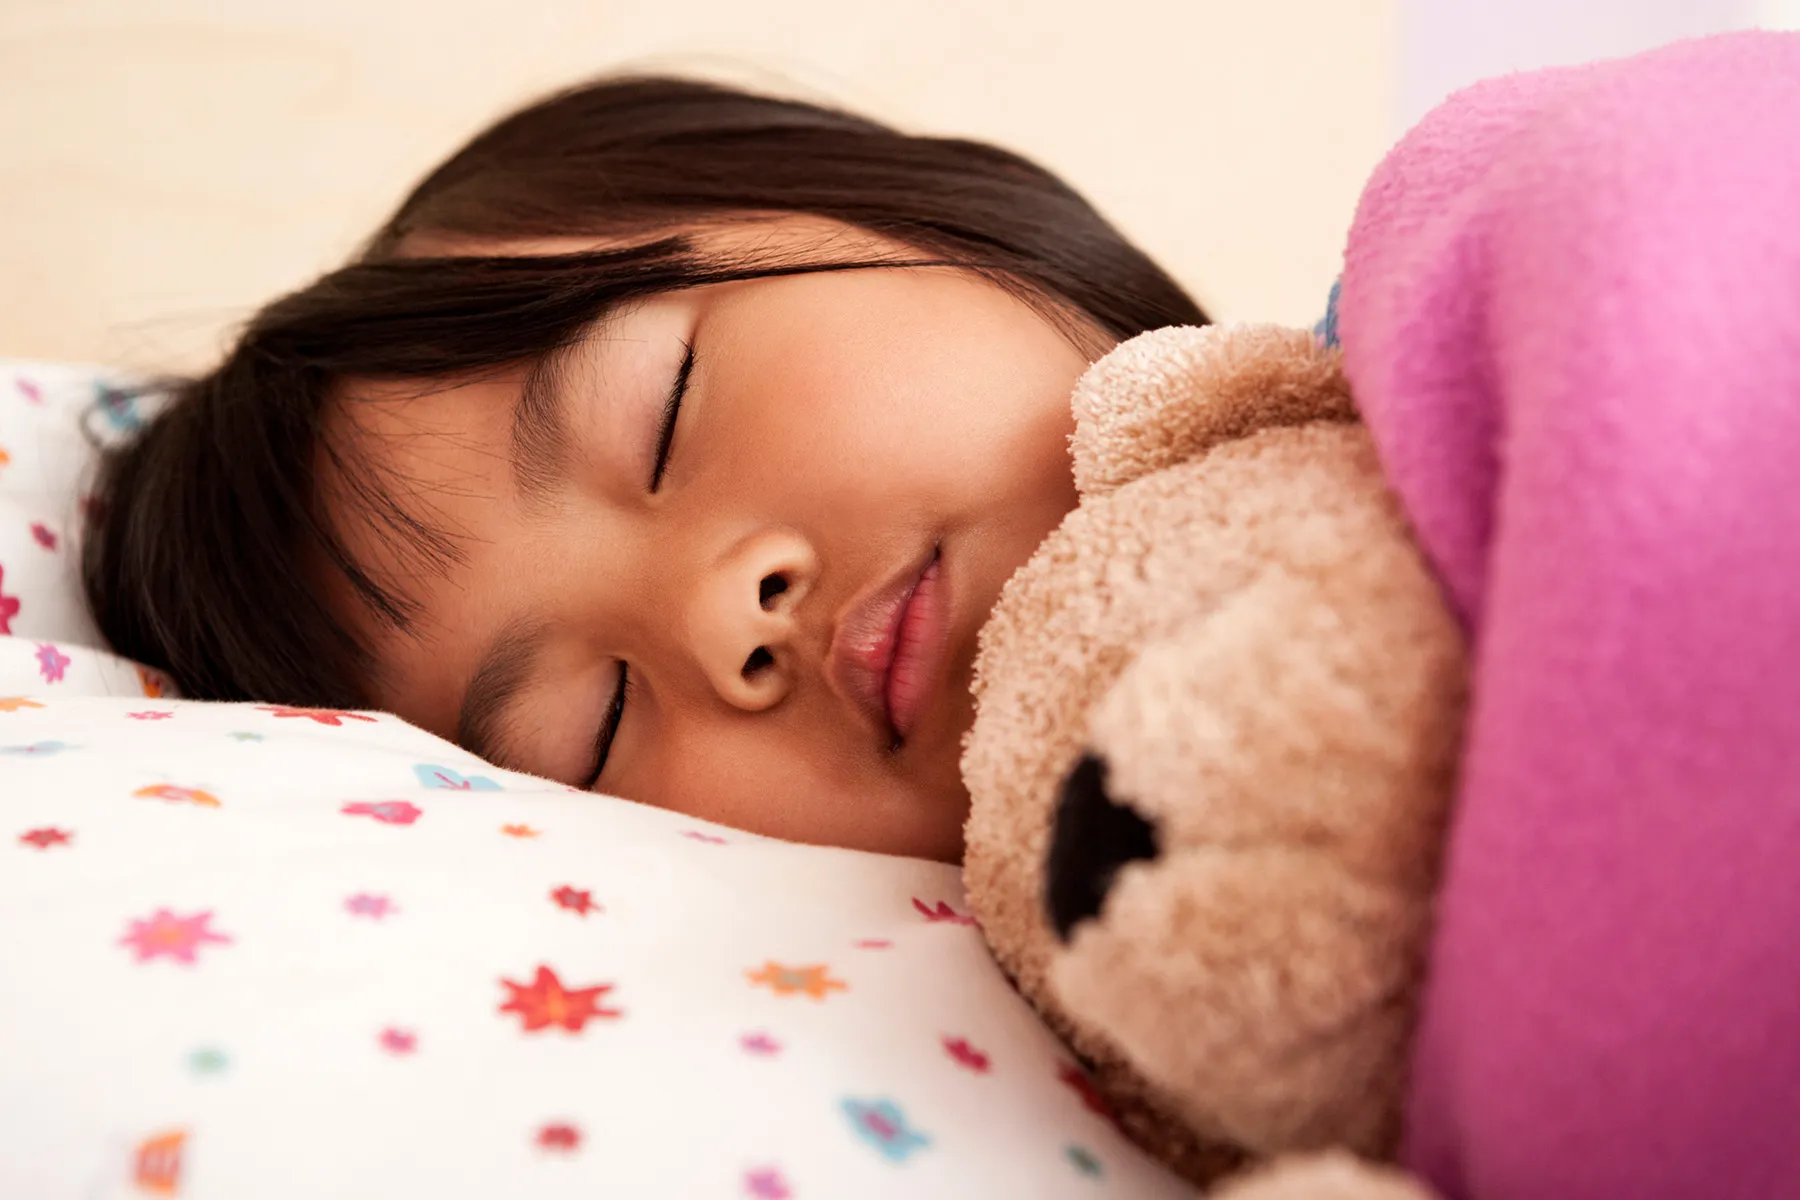 photo of young girl asleep in bed